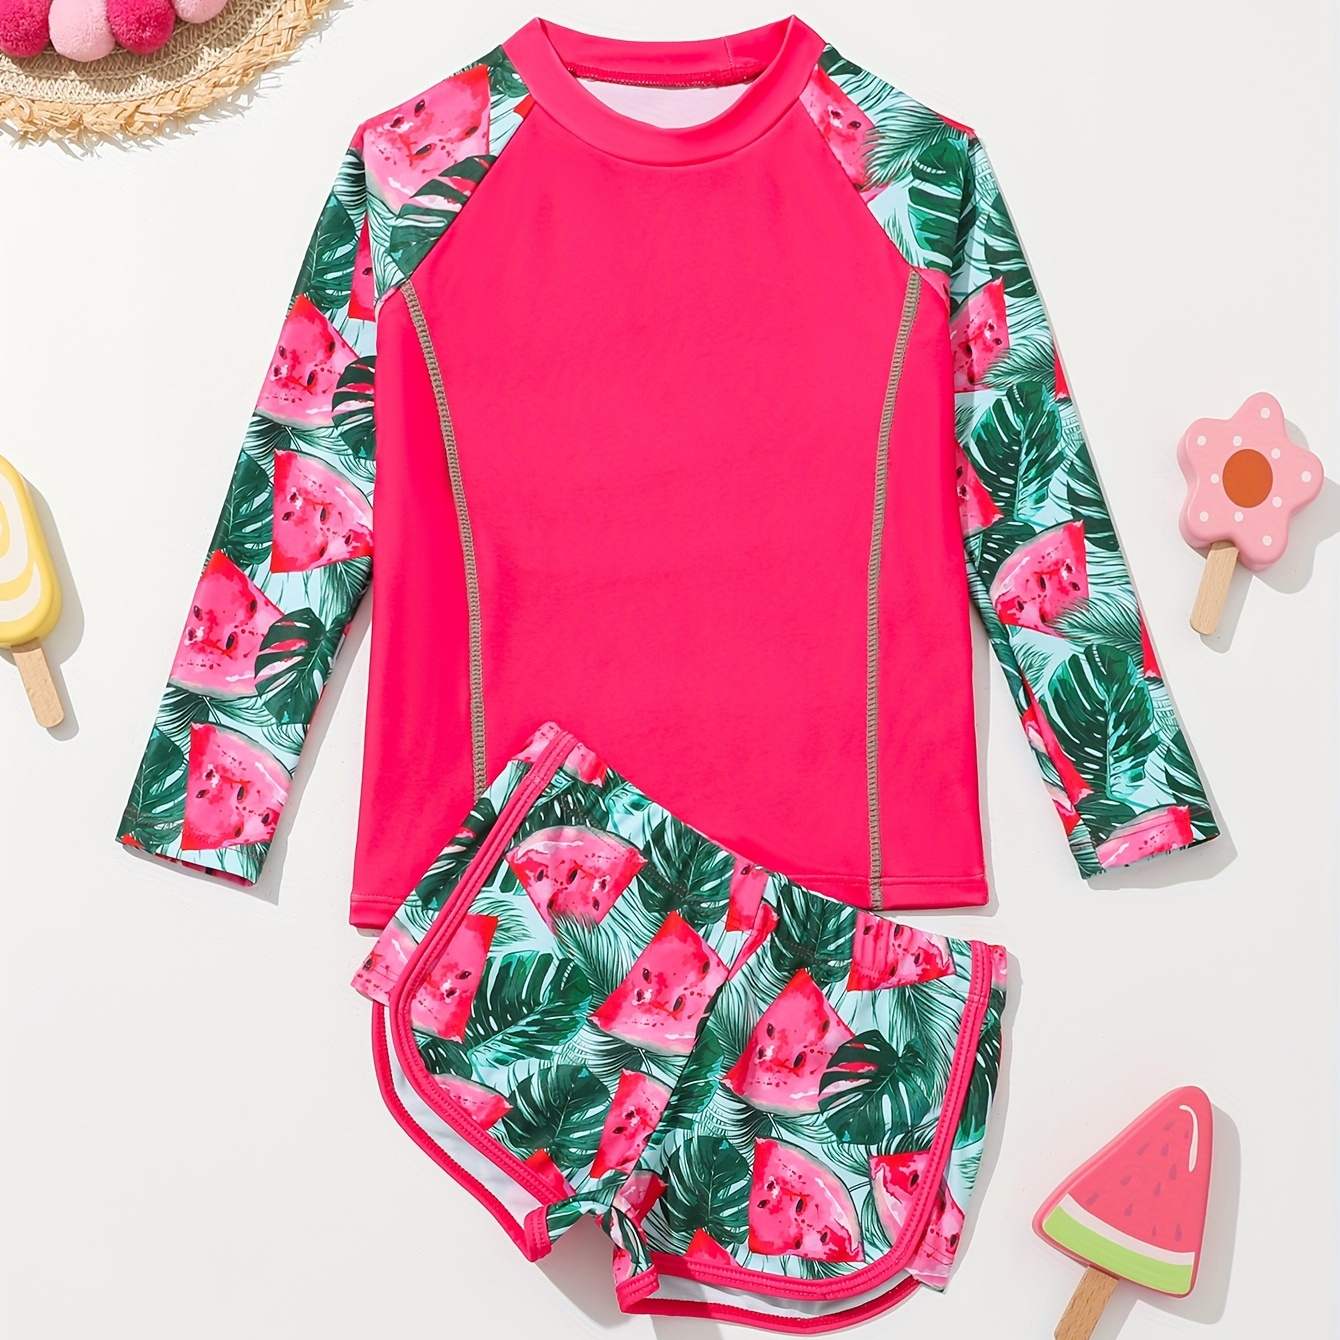 

2pcs Toddler's Watermelon & Leaves Pattern Swimsuit, Long Sleeve Top & Swim Trunks Set, Stretchy Bathing Suit, Baby Girl's Swimwear For Beach Vacation